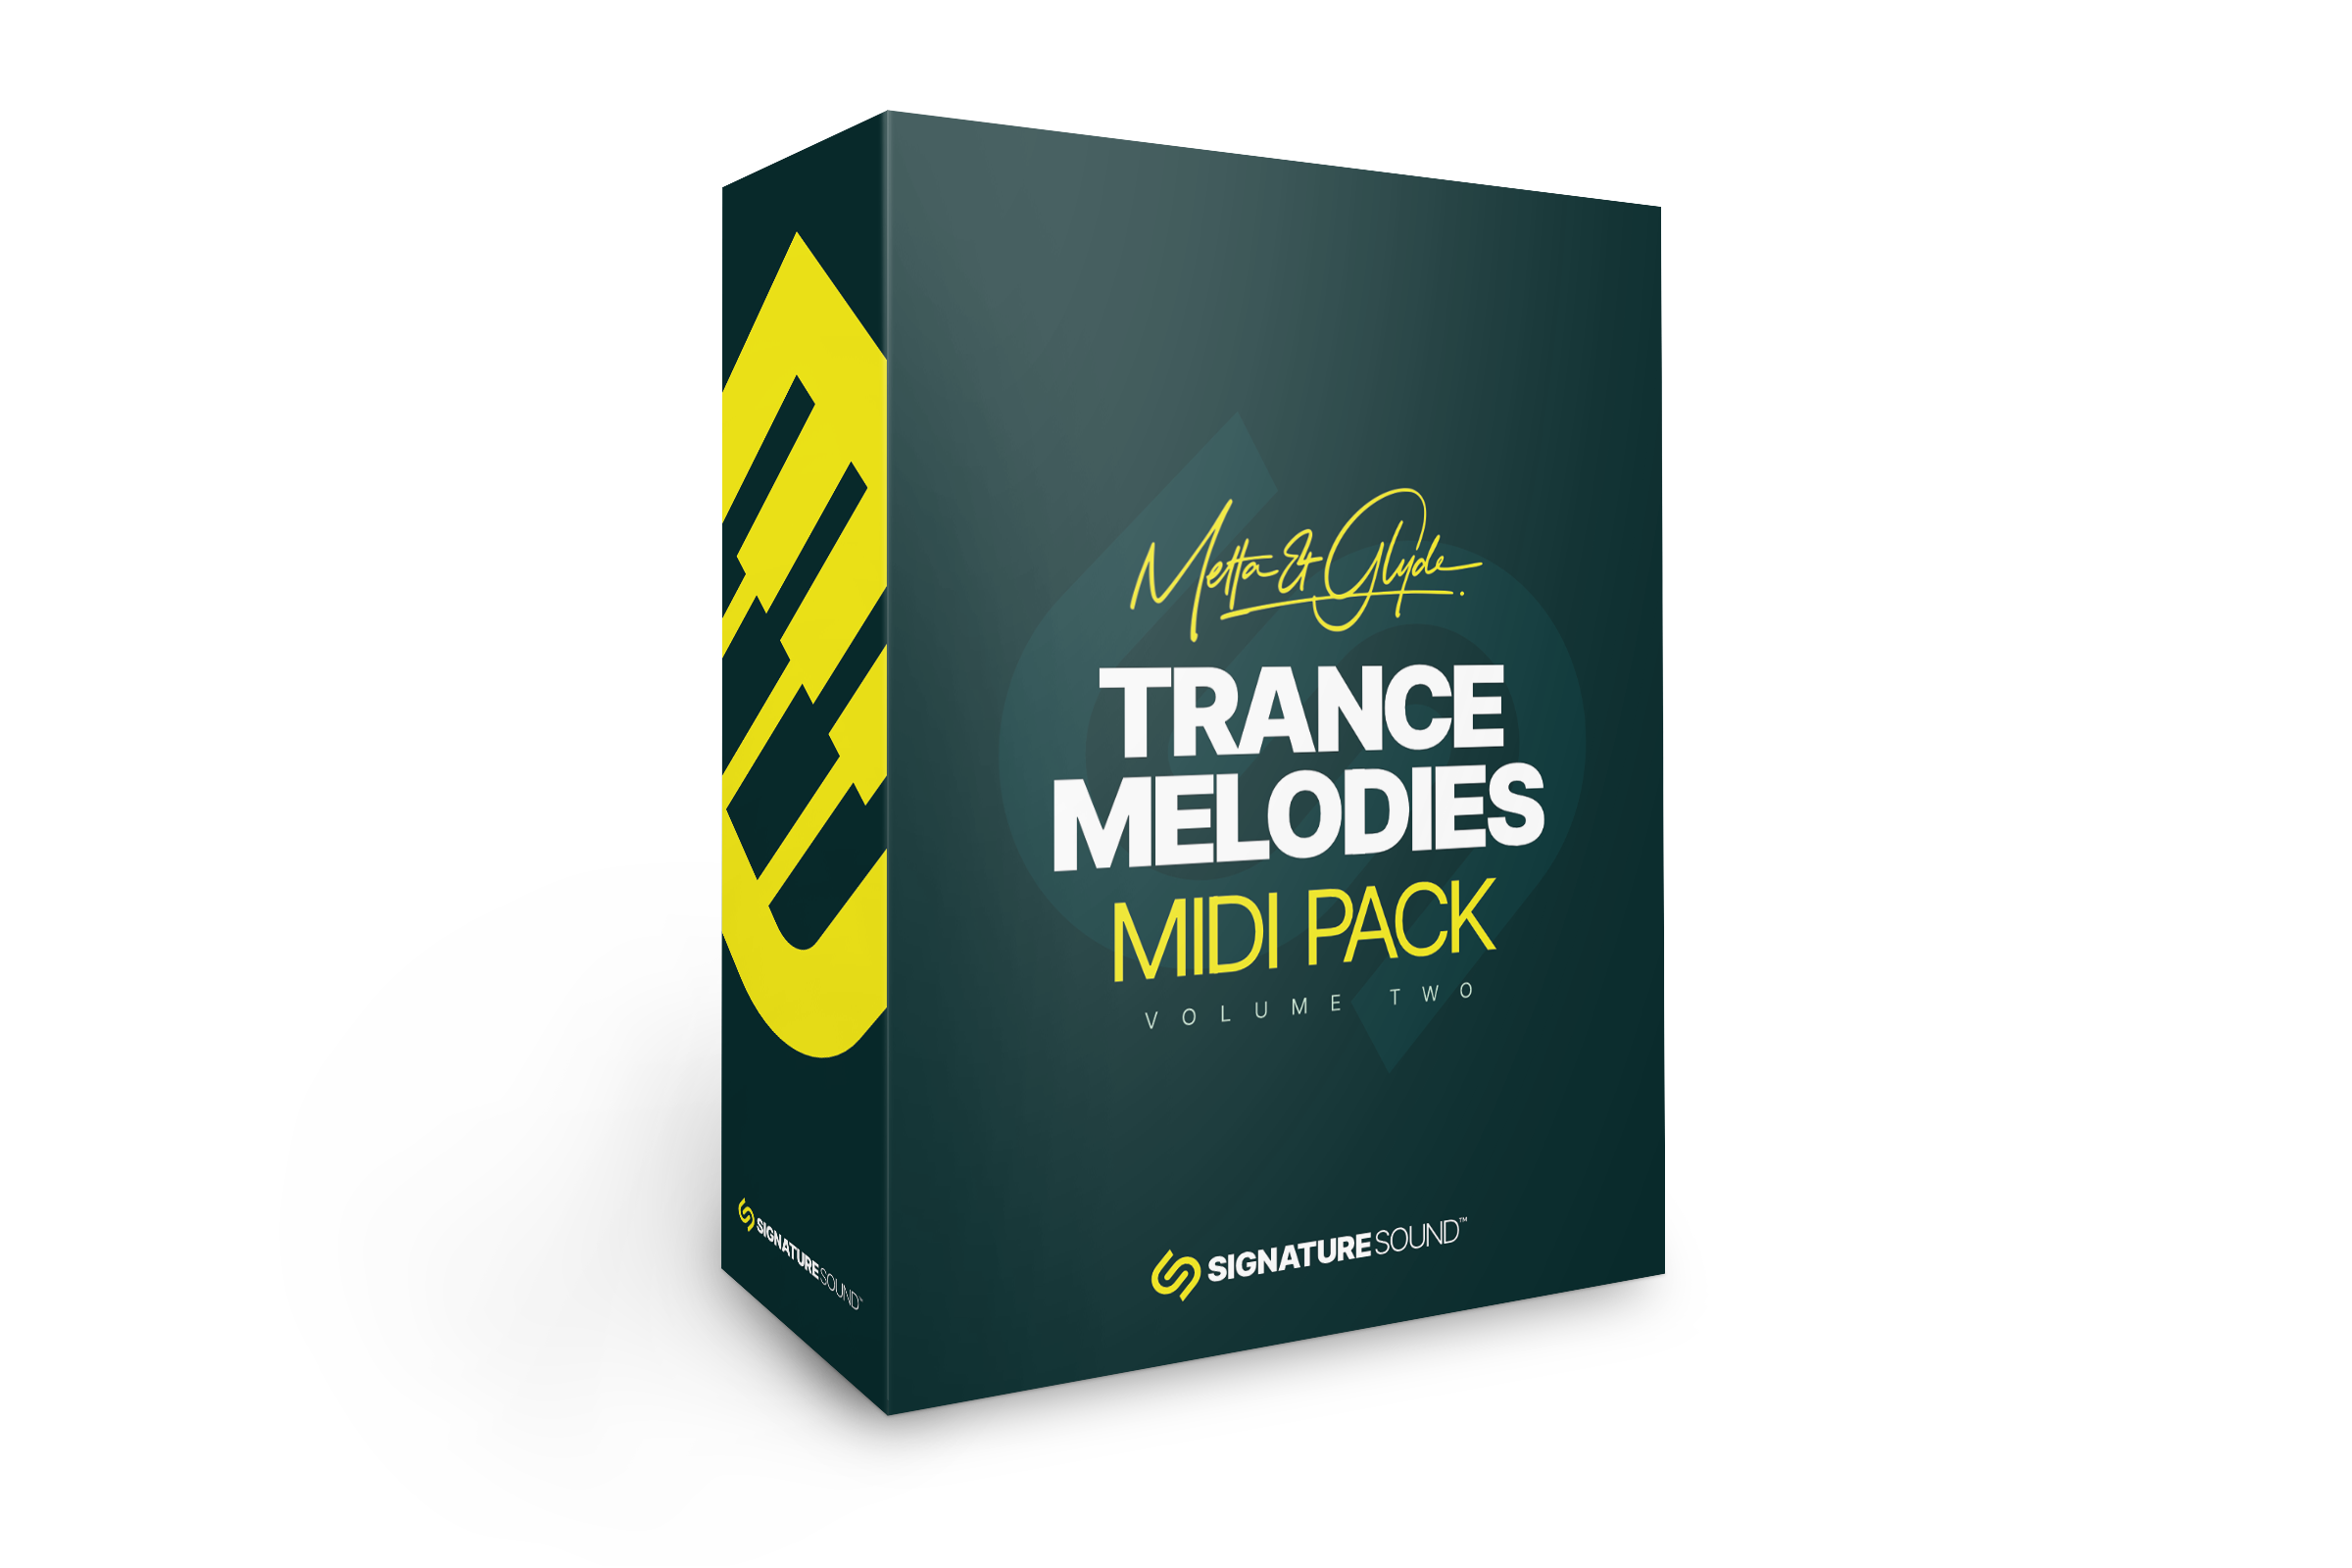 Metta and Glyde Trance Melodies [Midi Pack] Volume Two